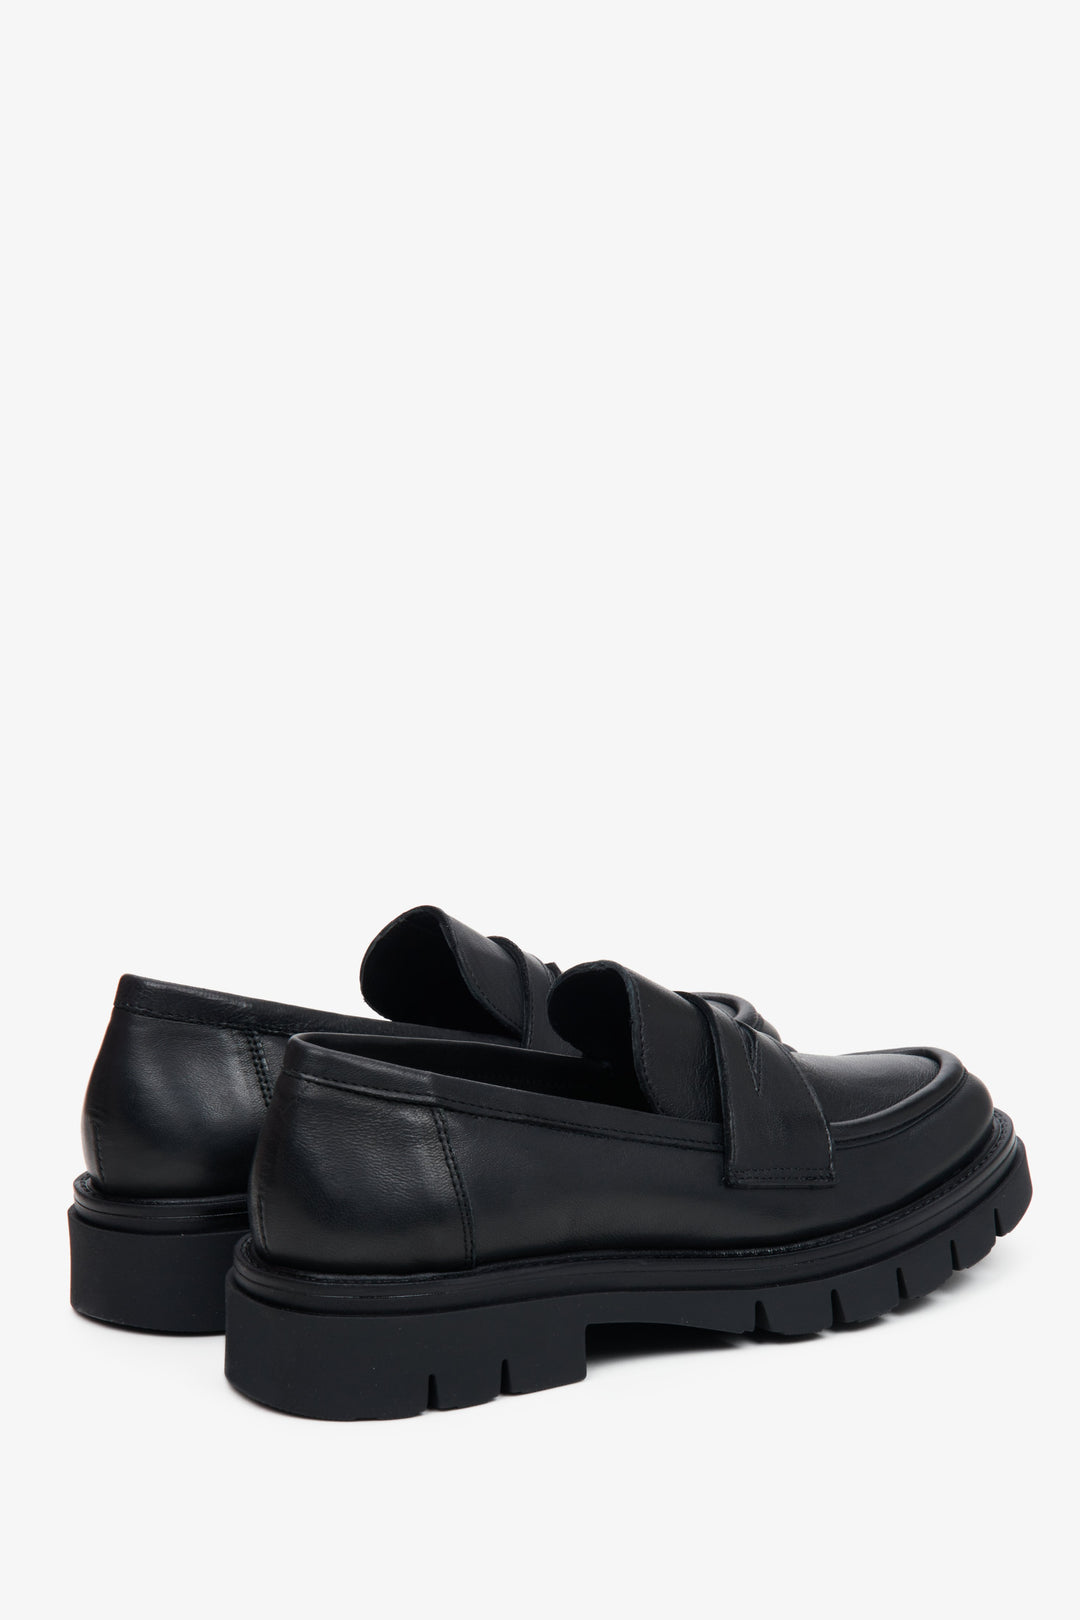 Women's black Estro loafers crafted of Italian leather - close-up on the buckle and side line of the shoes.